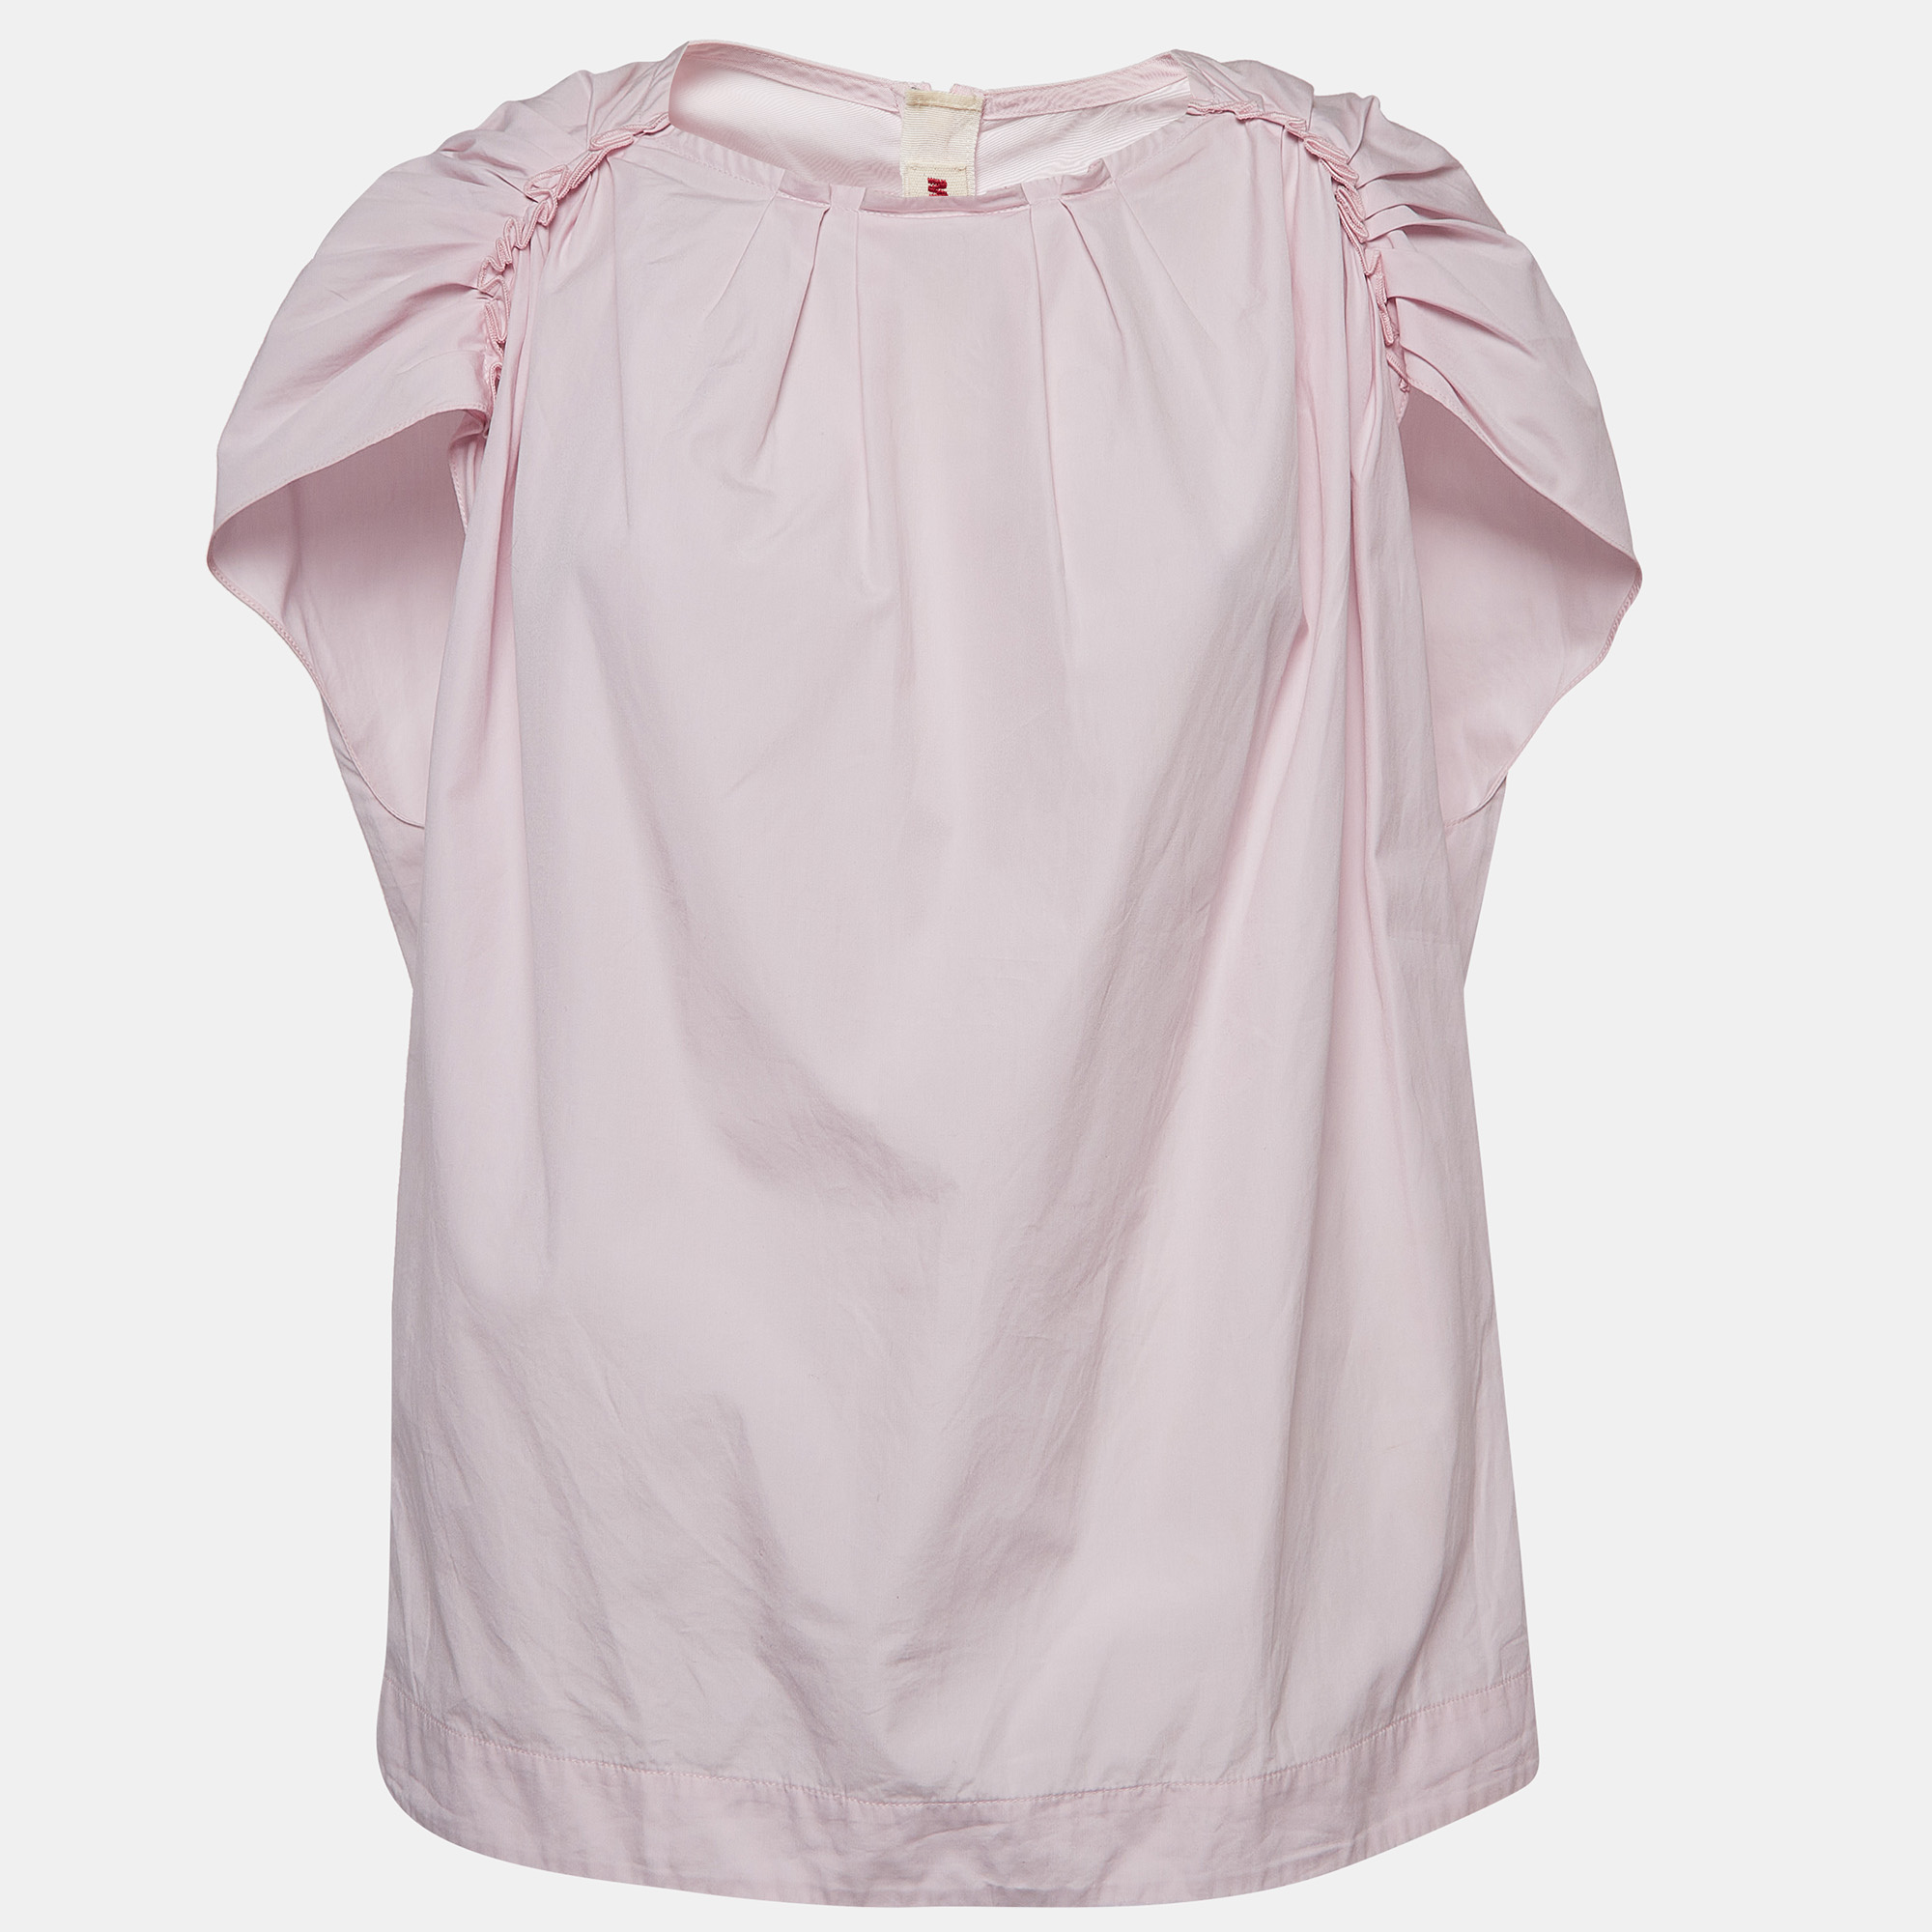 Marni powder pink cotton pleated cap sleeve blouse s